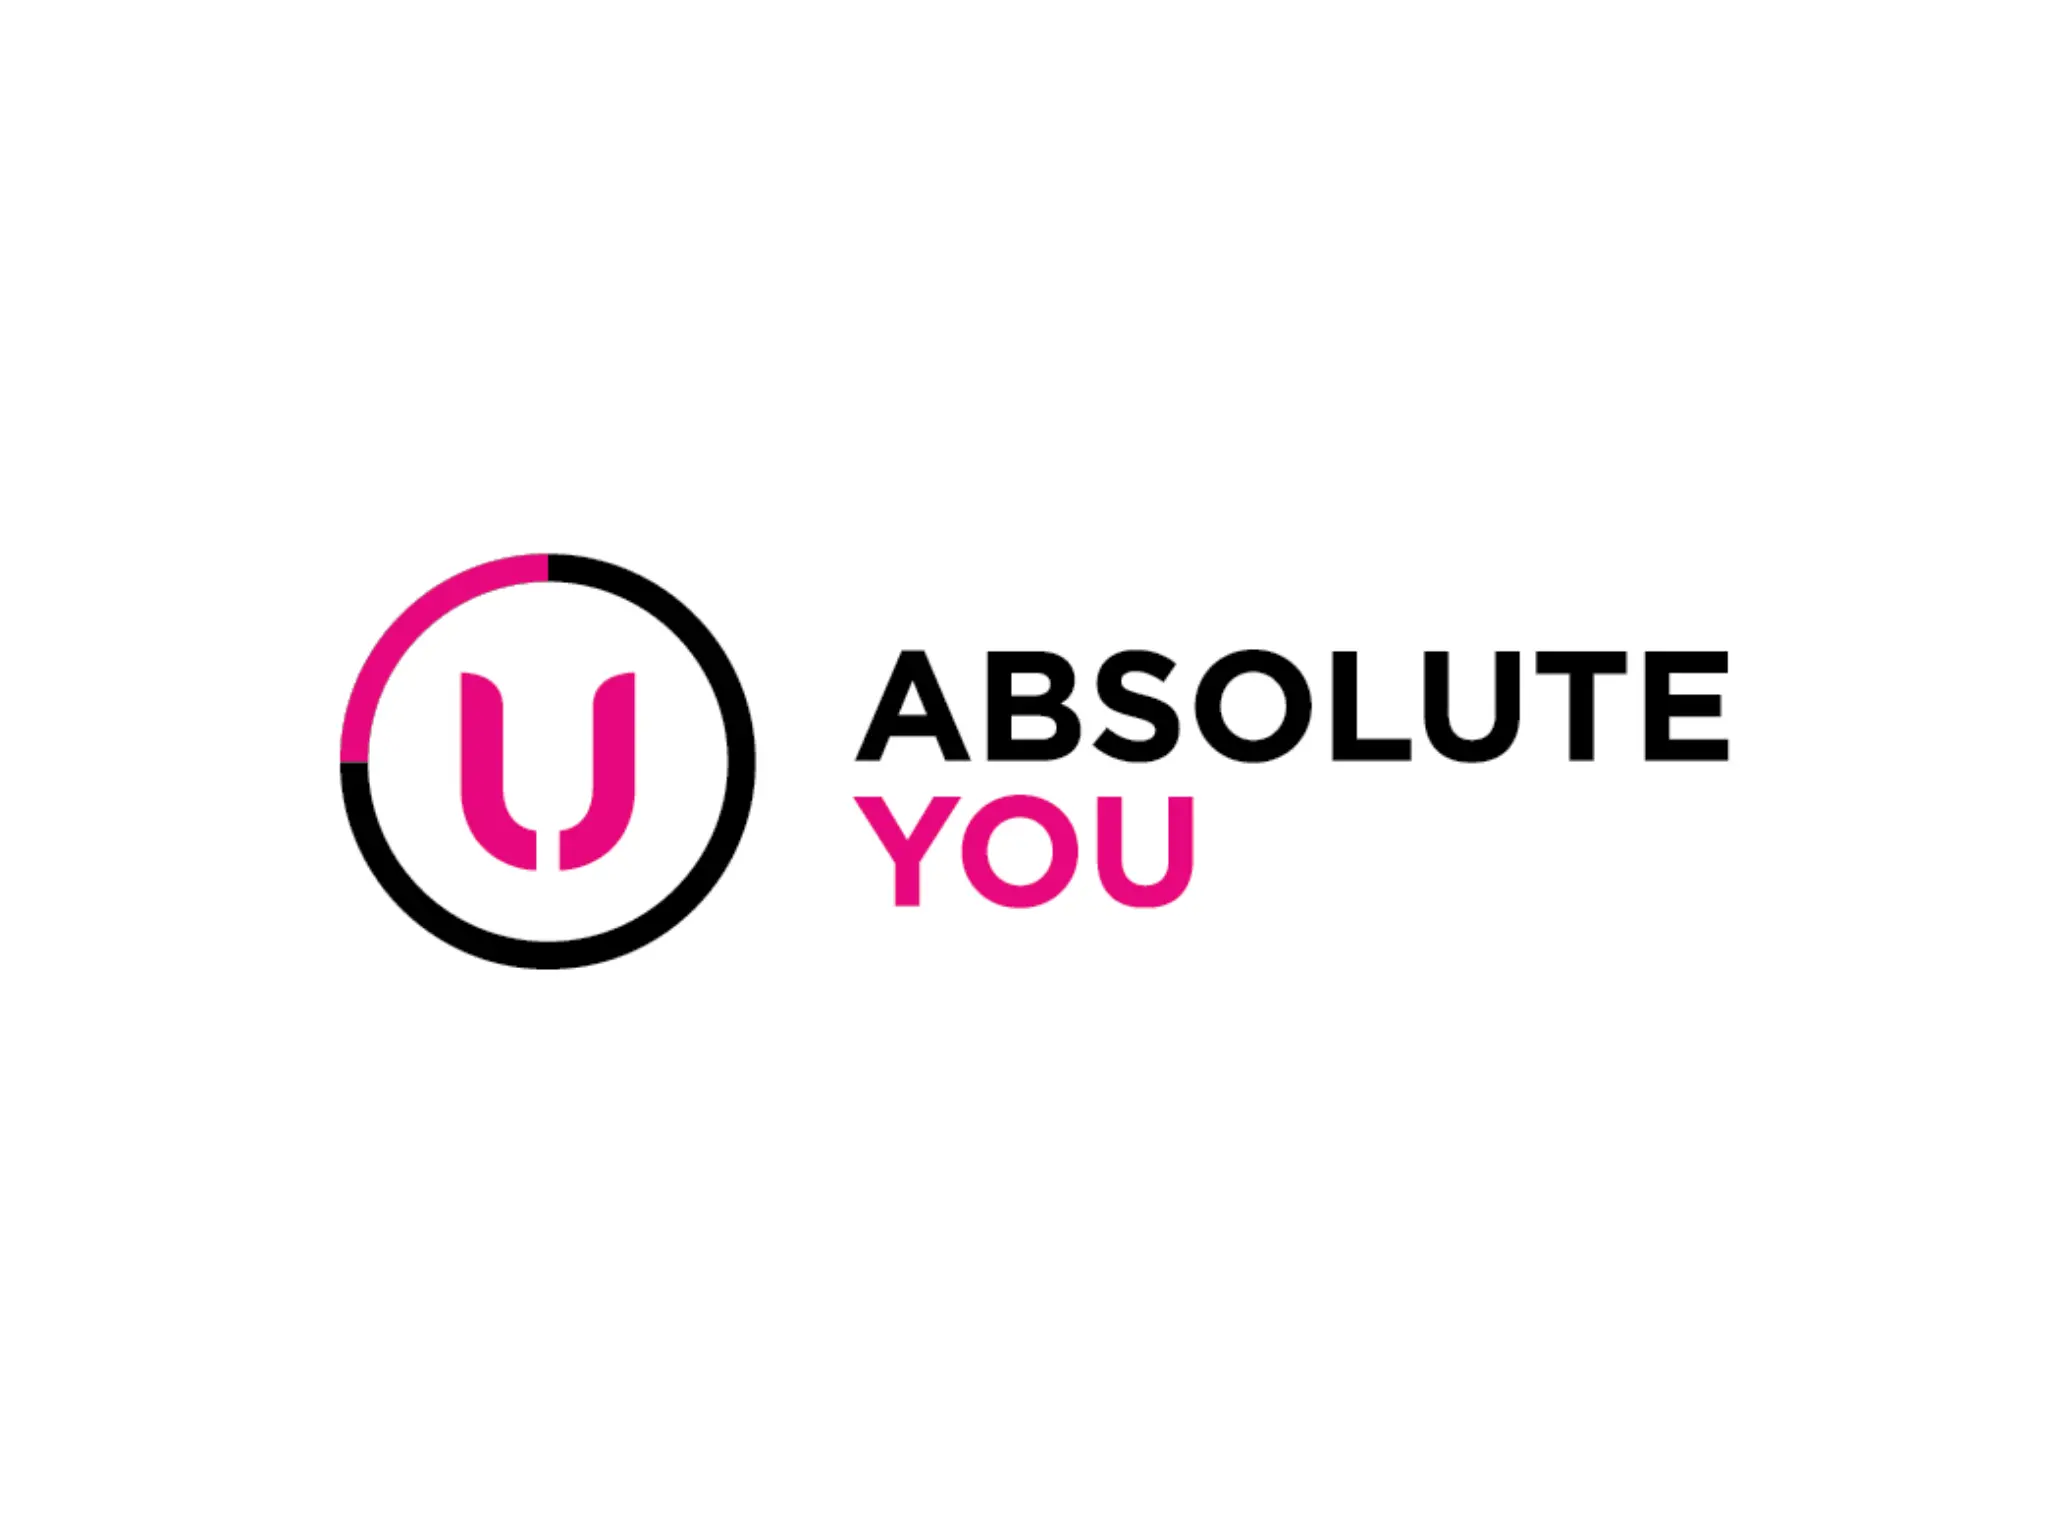 ABSOLUTE YOU SG